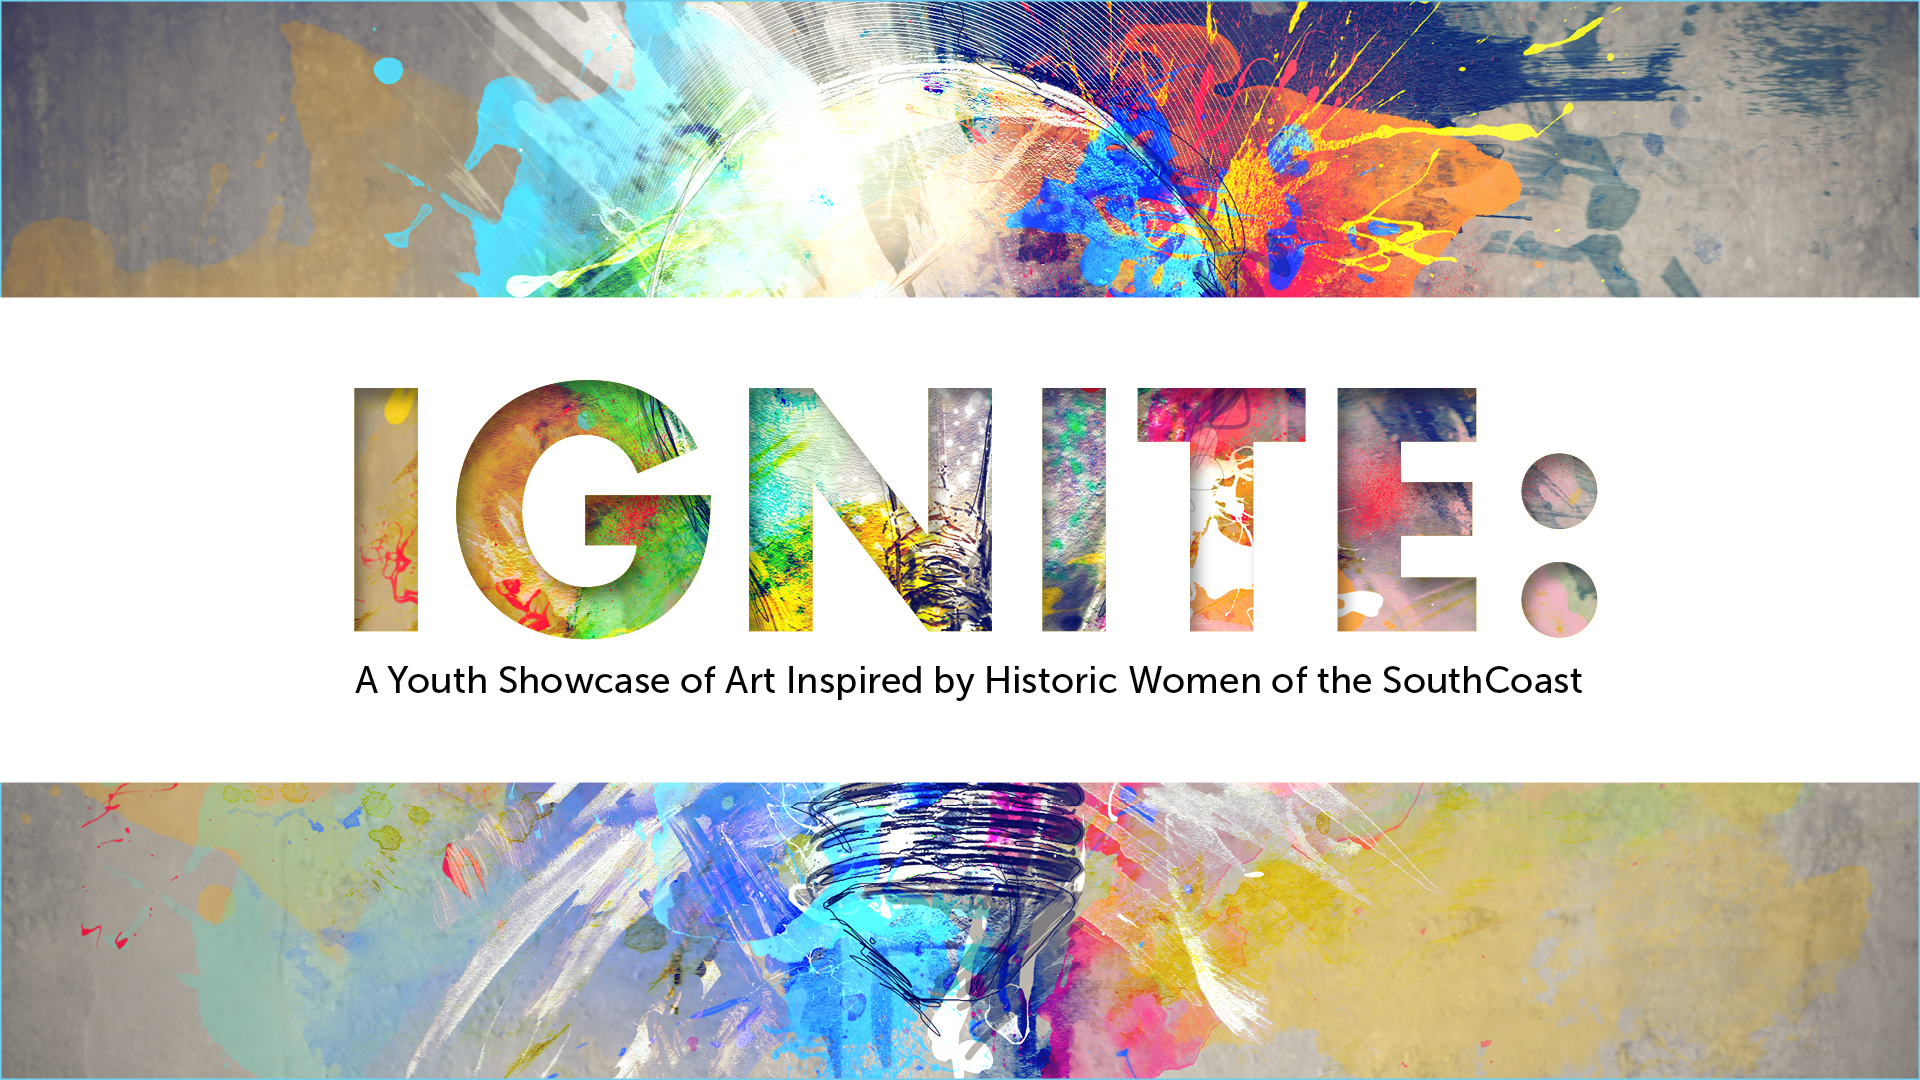 The logo for "Ignite: A youth showcase of art inspired by historic women of the SouthCoast."